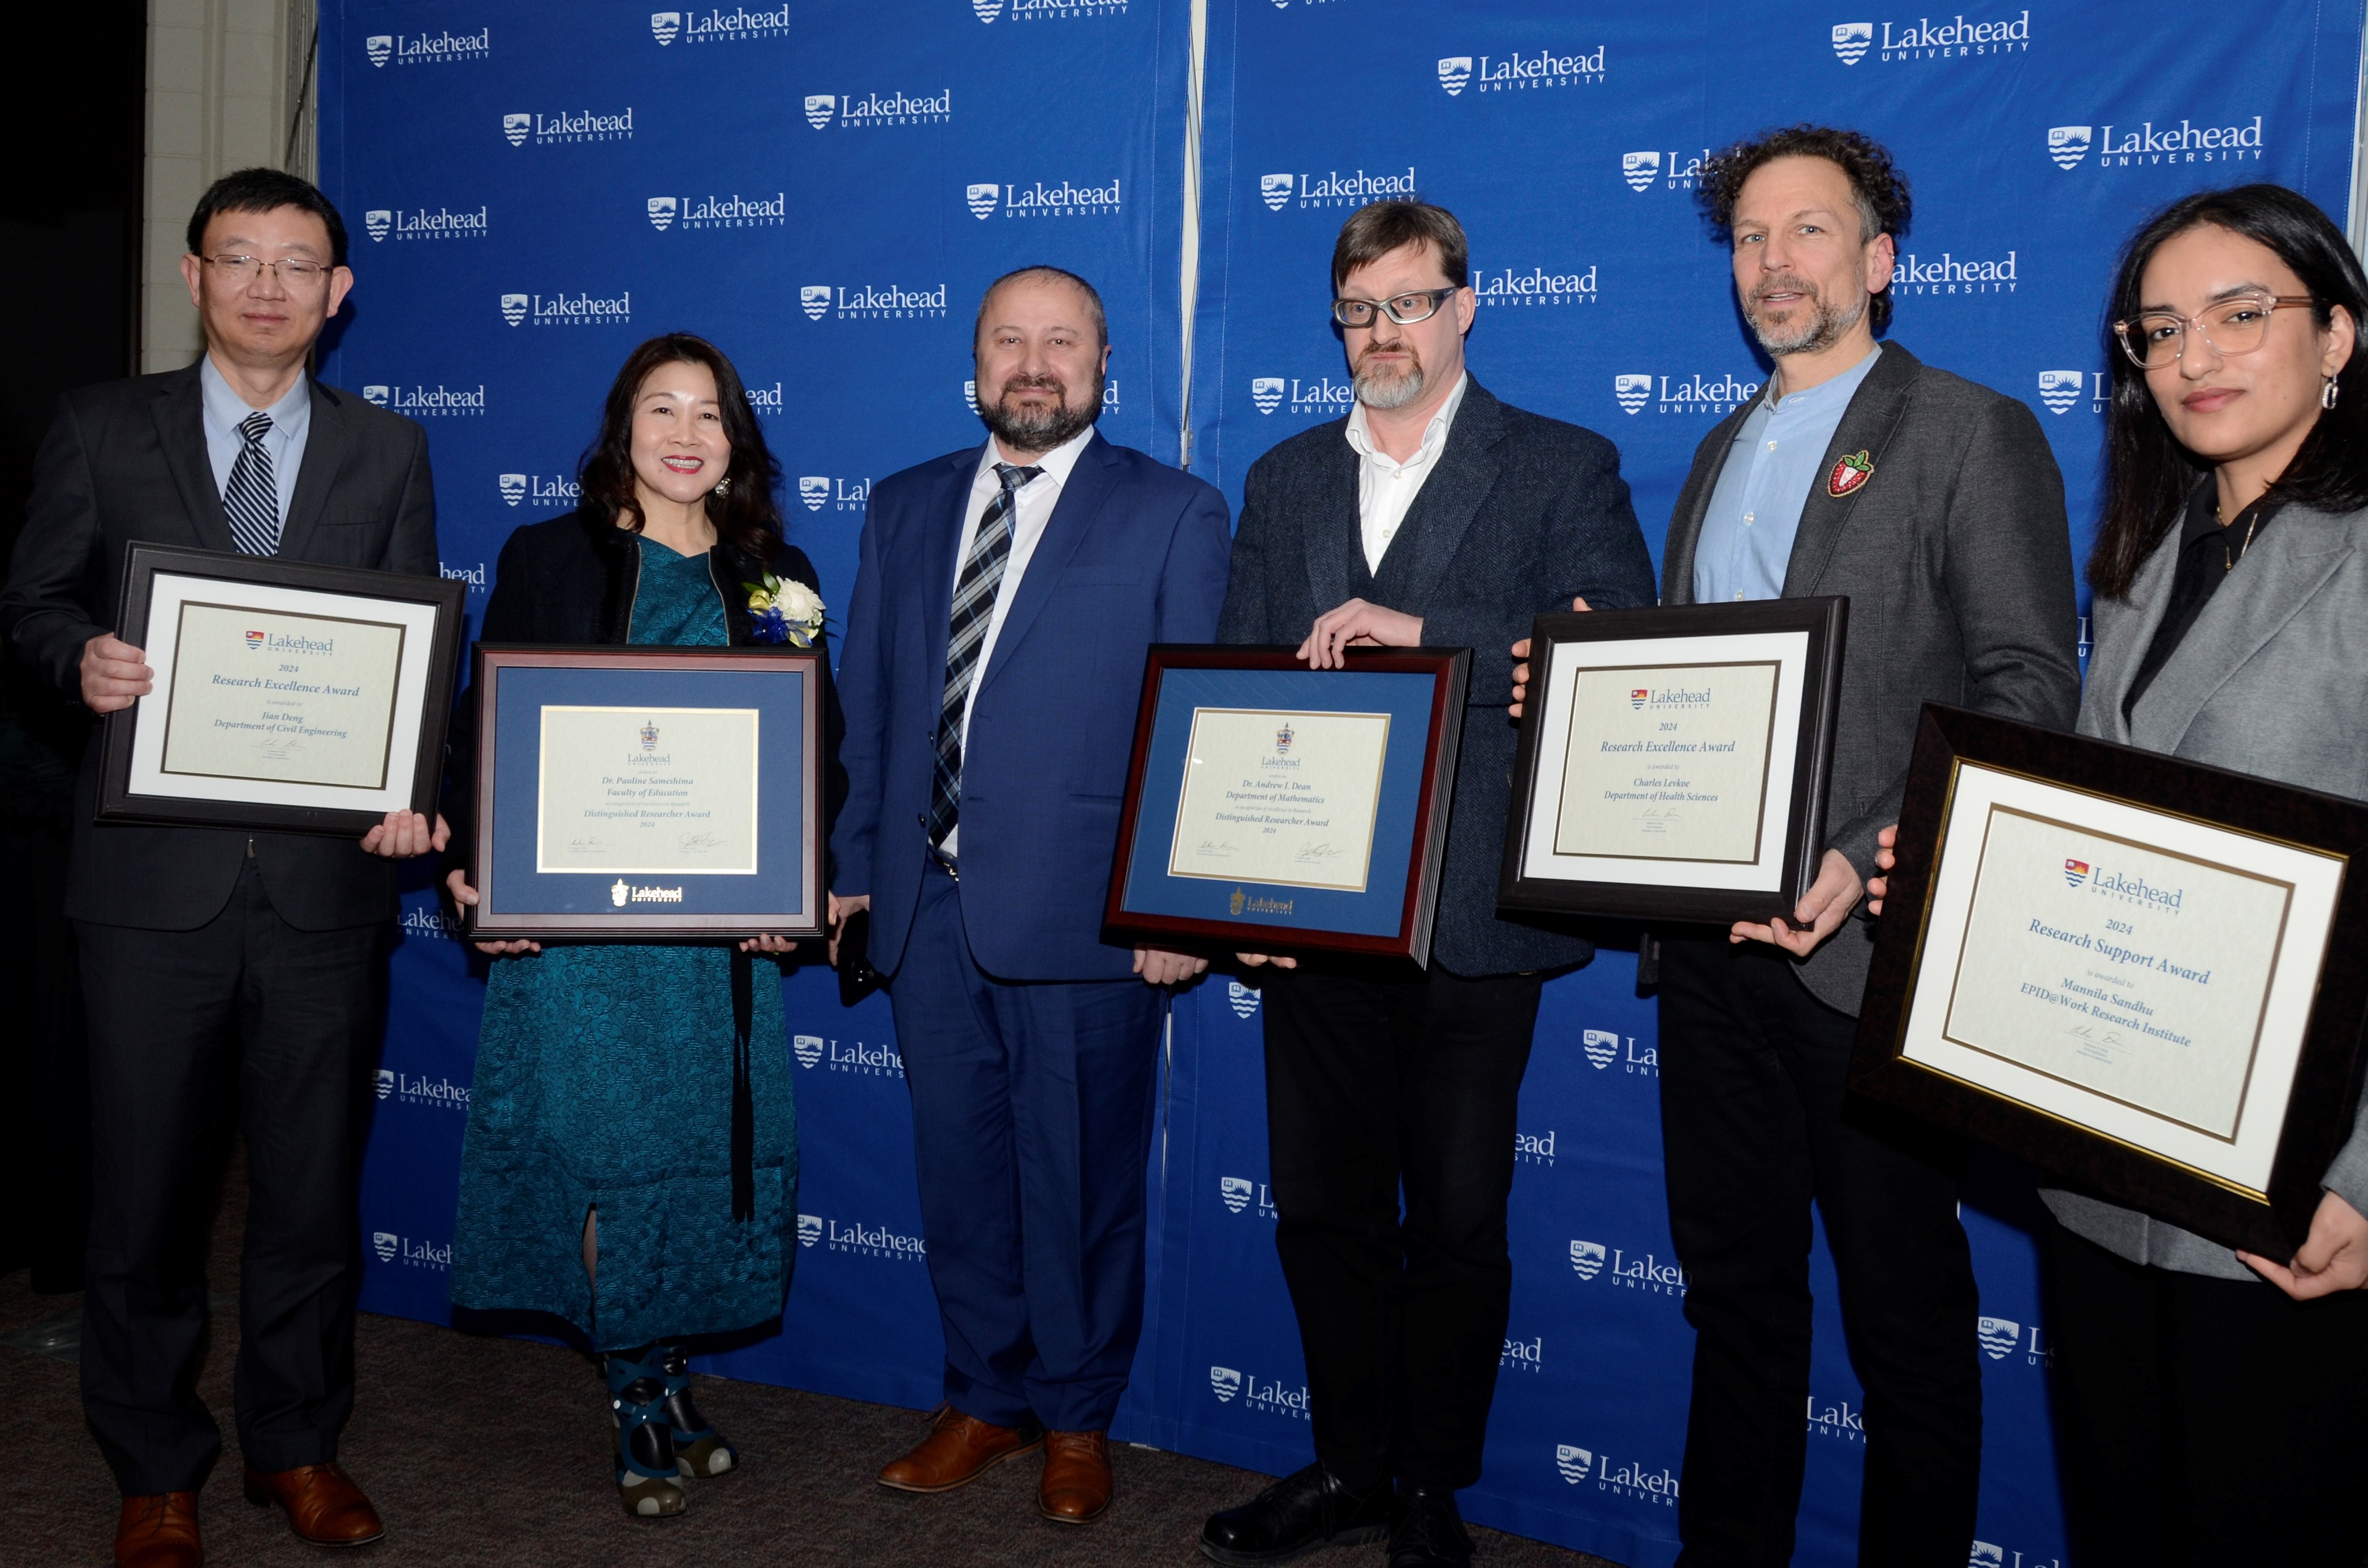 The Senate Research Committee research awards